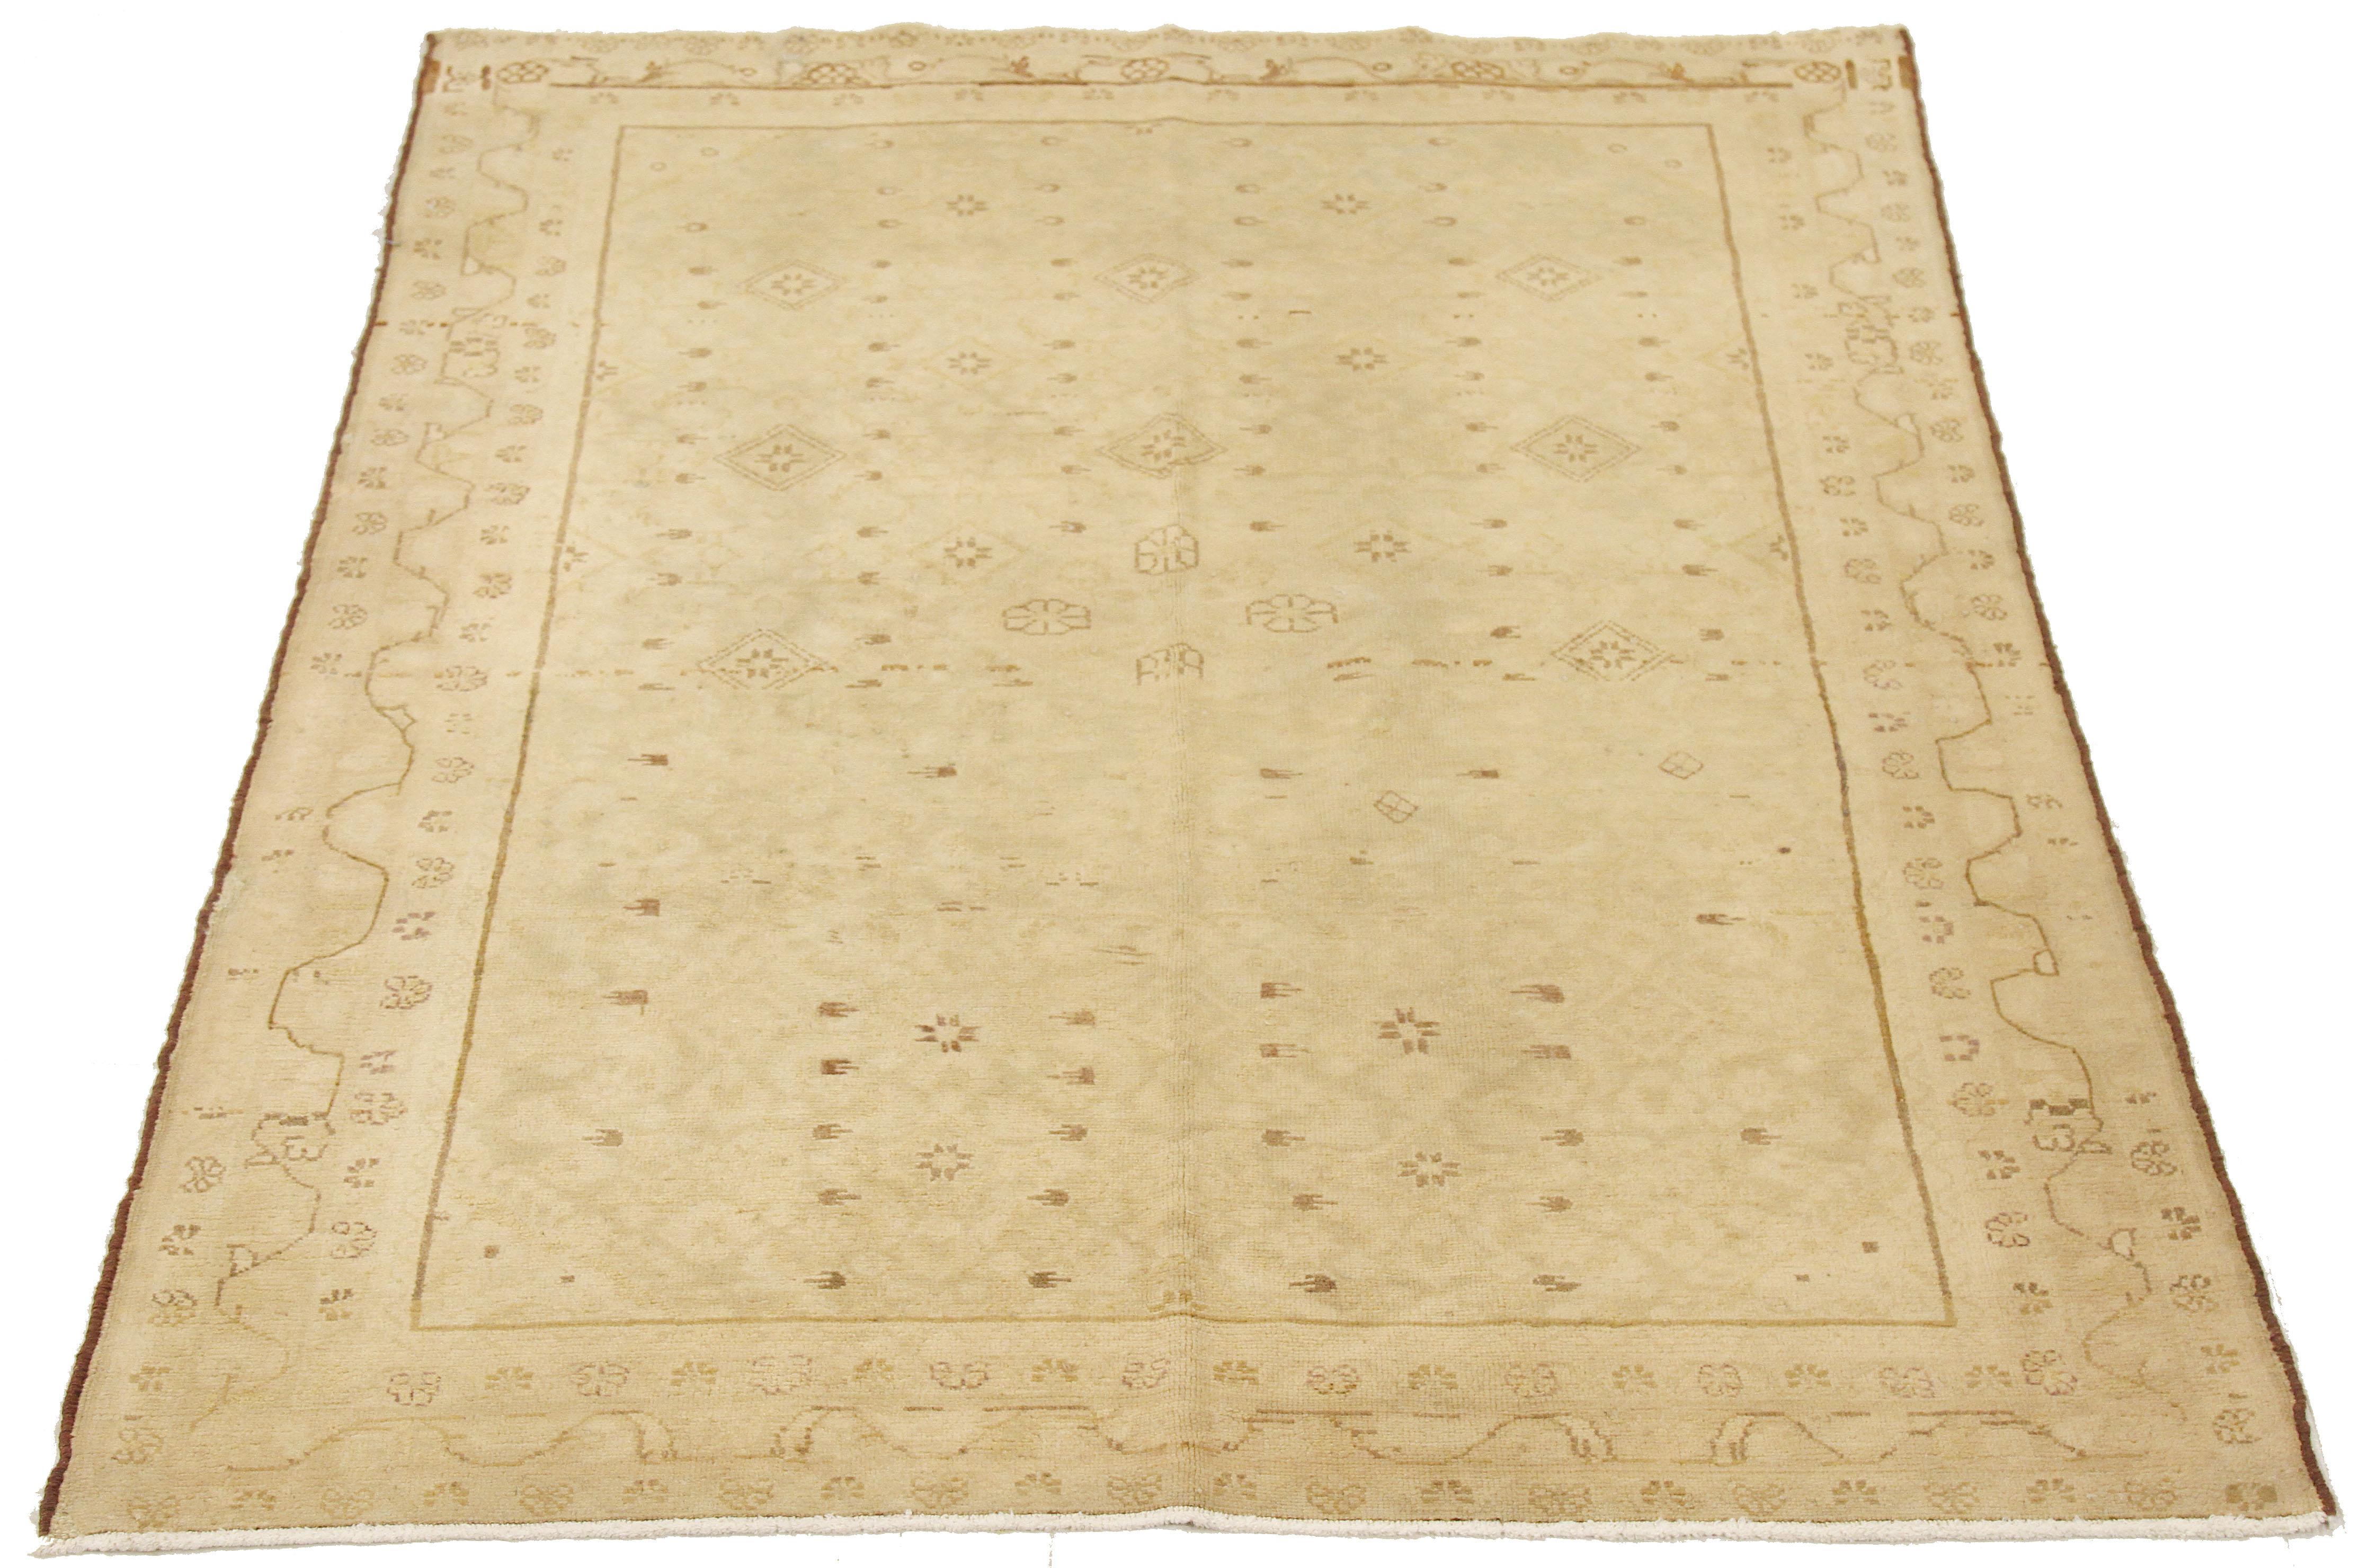 Antique Persian rug handwoven from the finest sheep’s wool and colored with all-natural vegetable dyes that are safe for humans and pets. It’s a traditional Tabriz weaving featuring a lovely ensemble of floral motifs in brown over an ivory field.